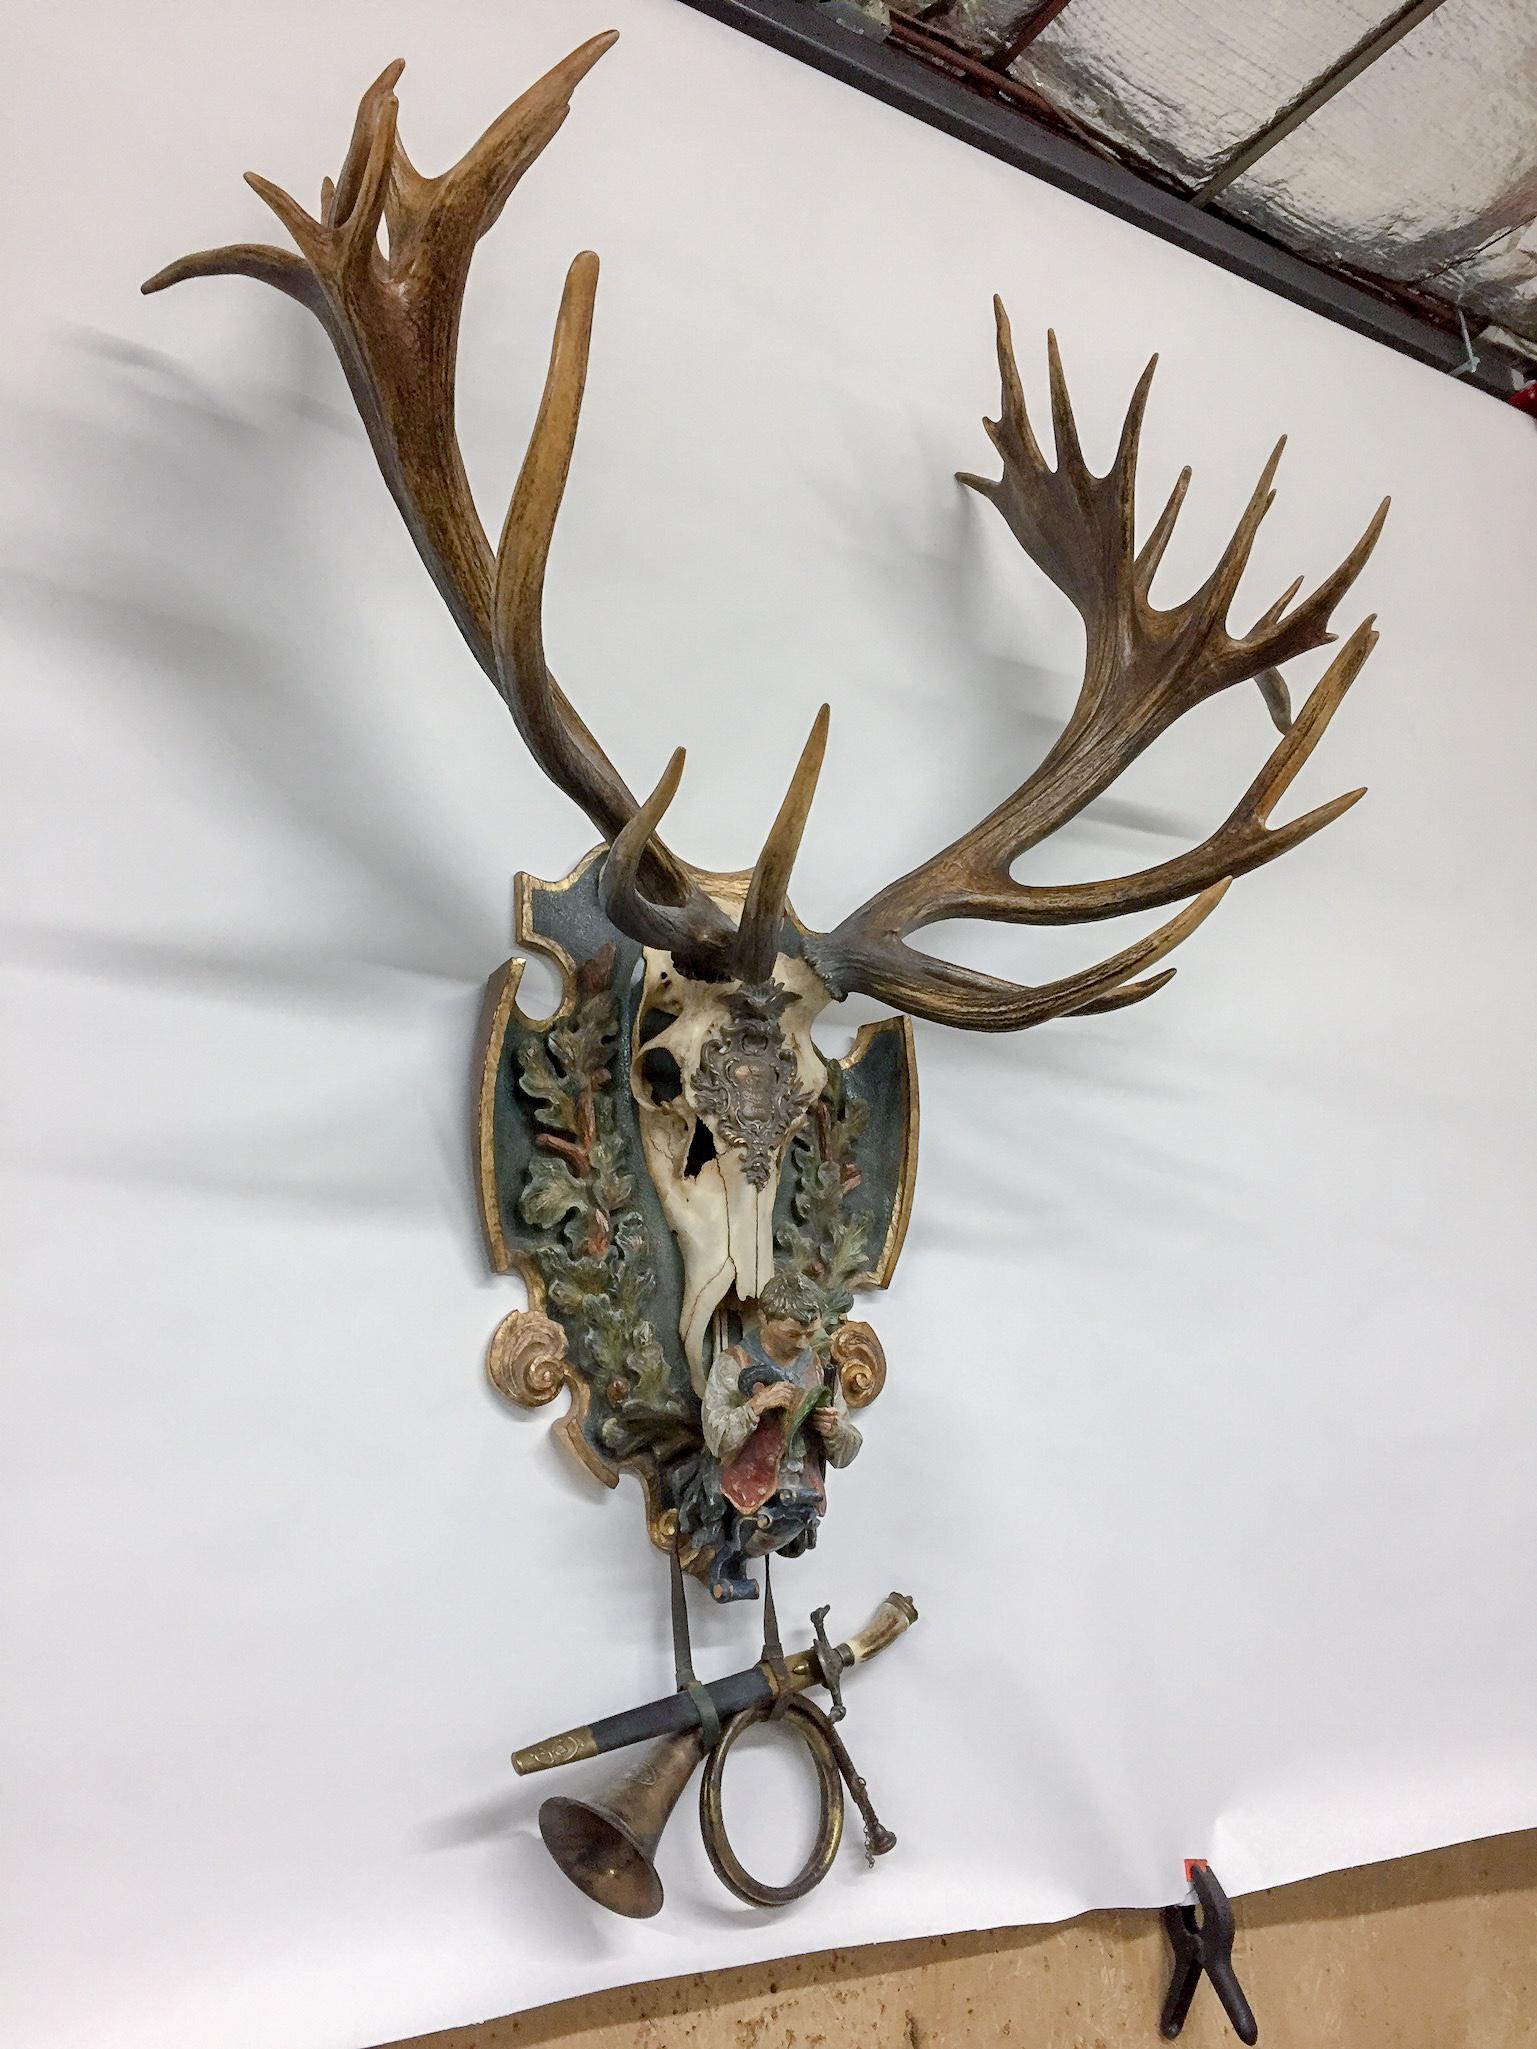 This historic, 19th century German red stag trophy is crafted with a hand carved polychrome Black Forest plaque featuring full cap, decorative plate hardware, Fürst Pless hunt horn and Hirschfänger. The carving at the bottom of the plaque represents